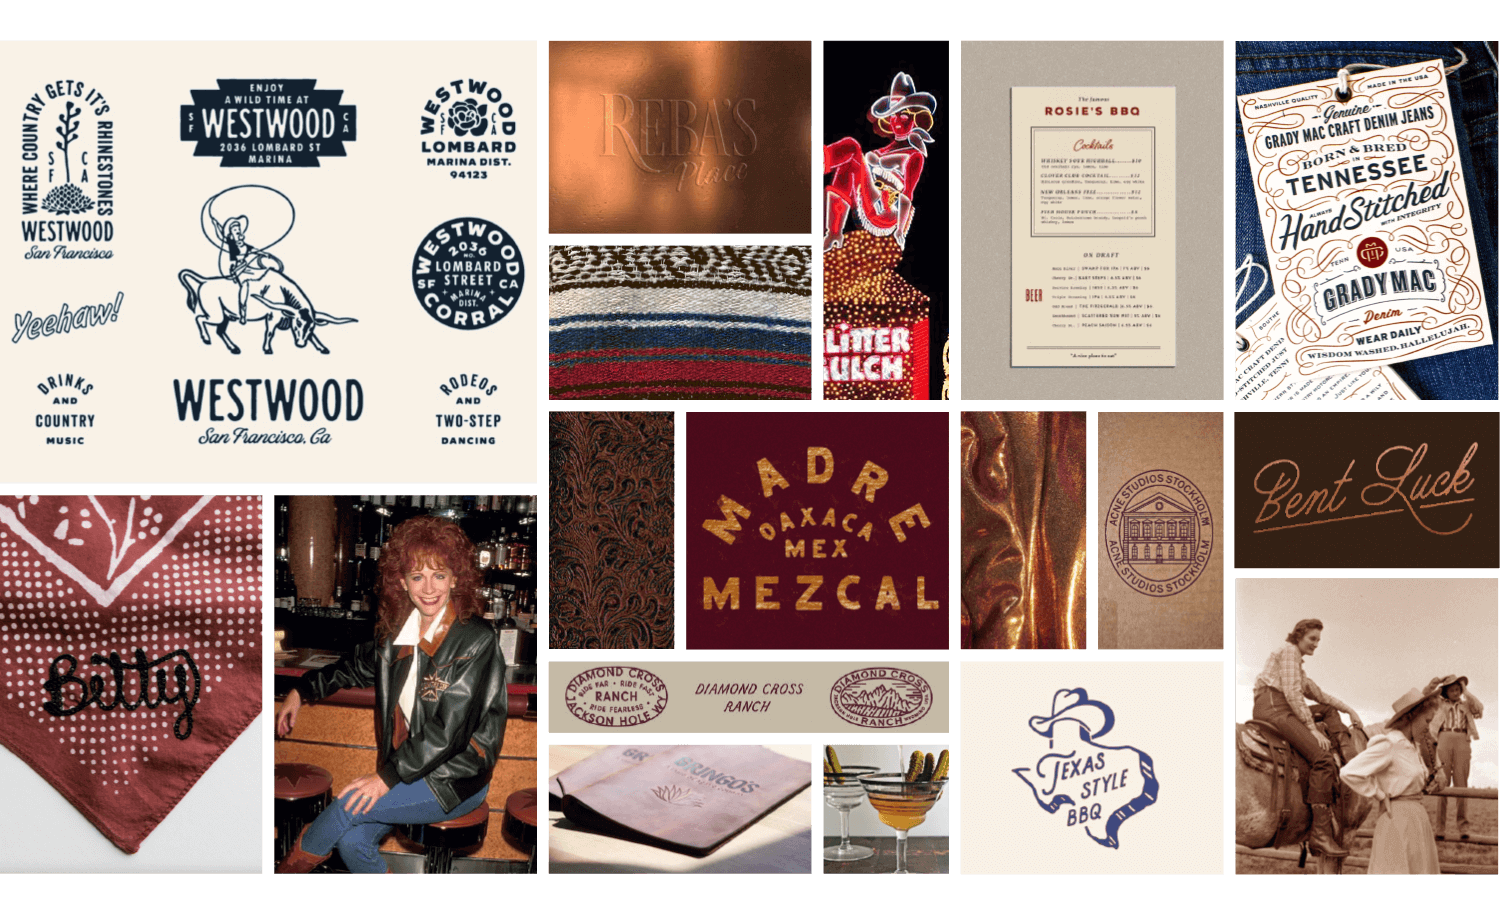 Moodboard of images serving as inspiration for Reba's Place